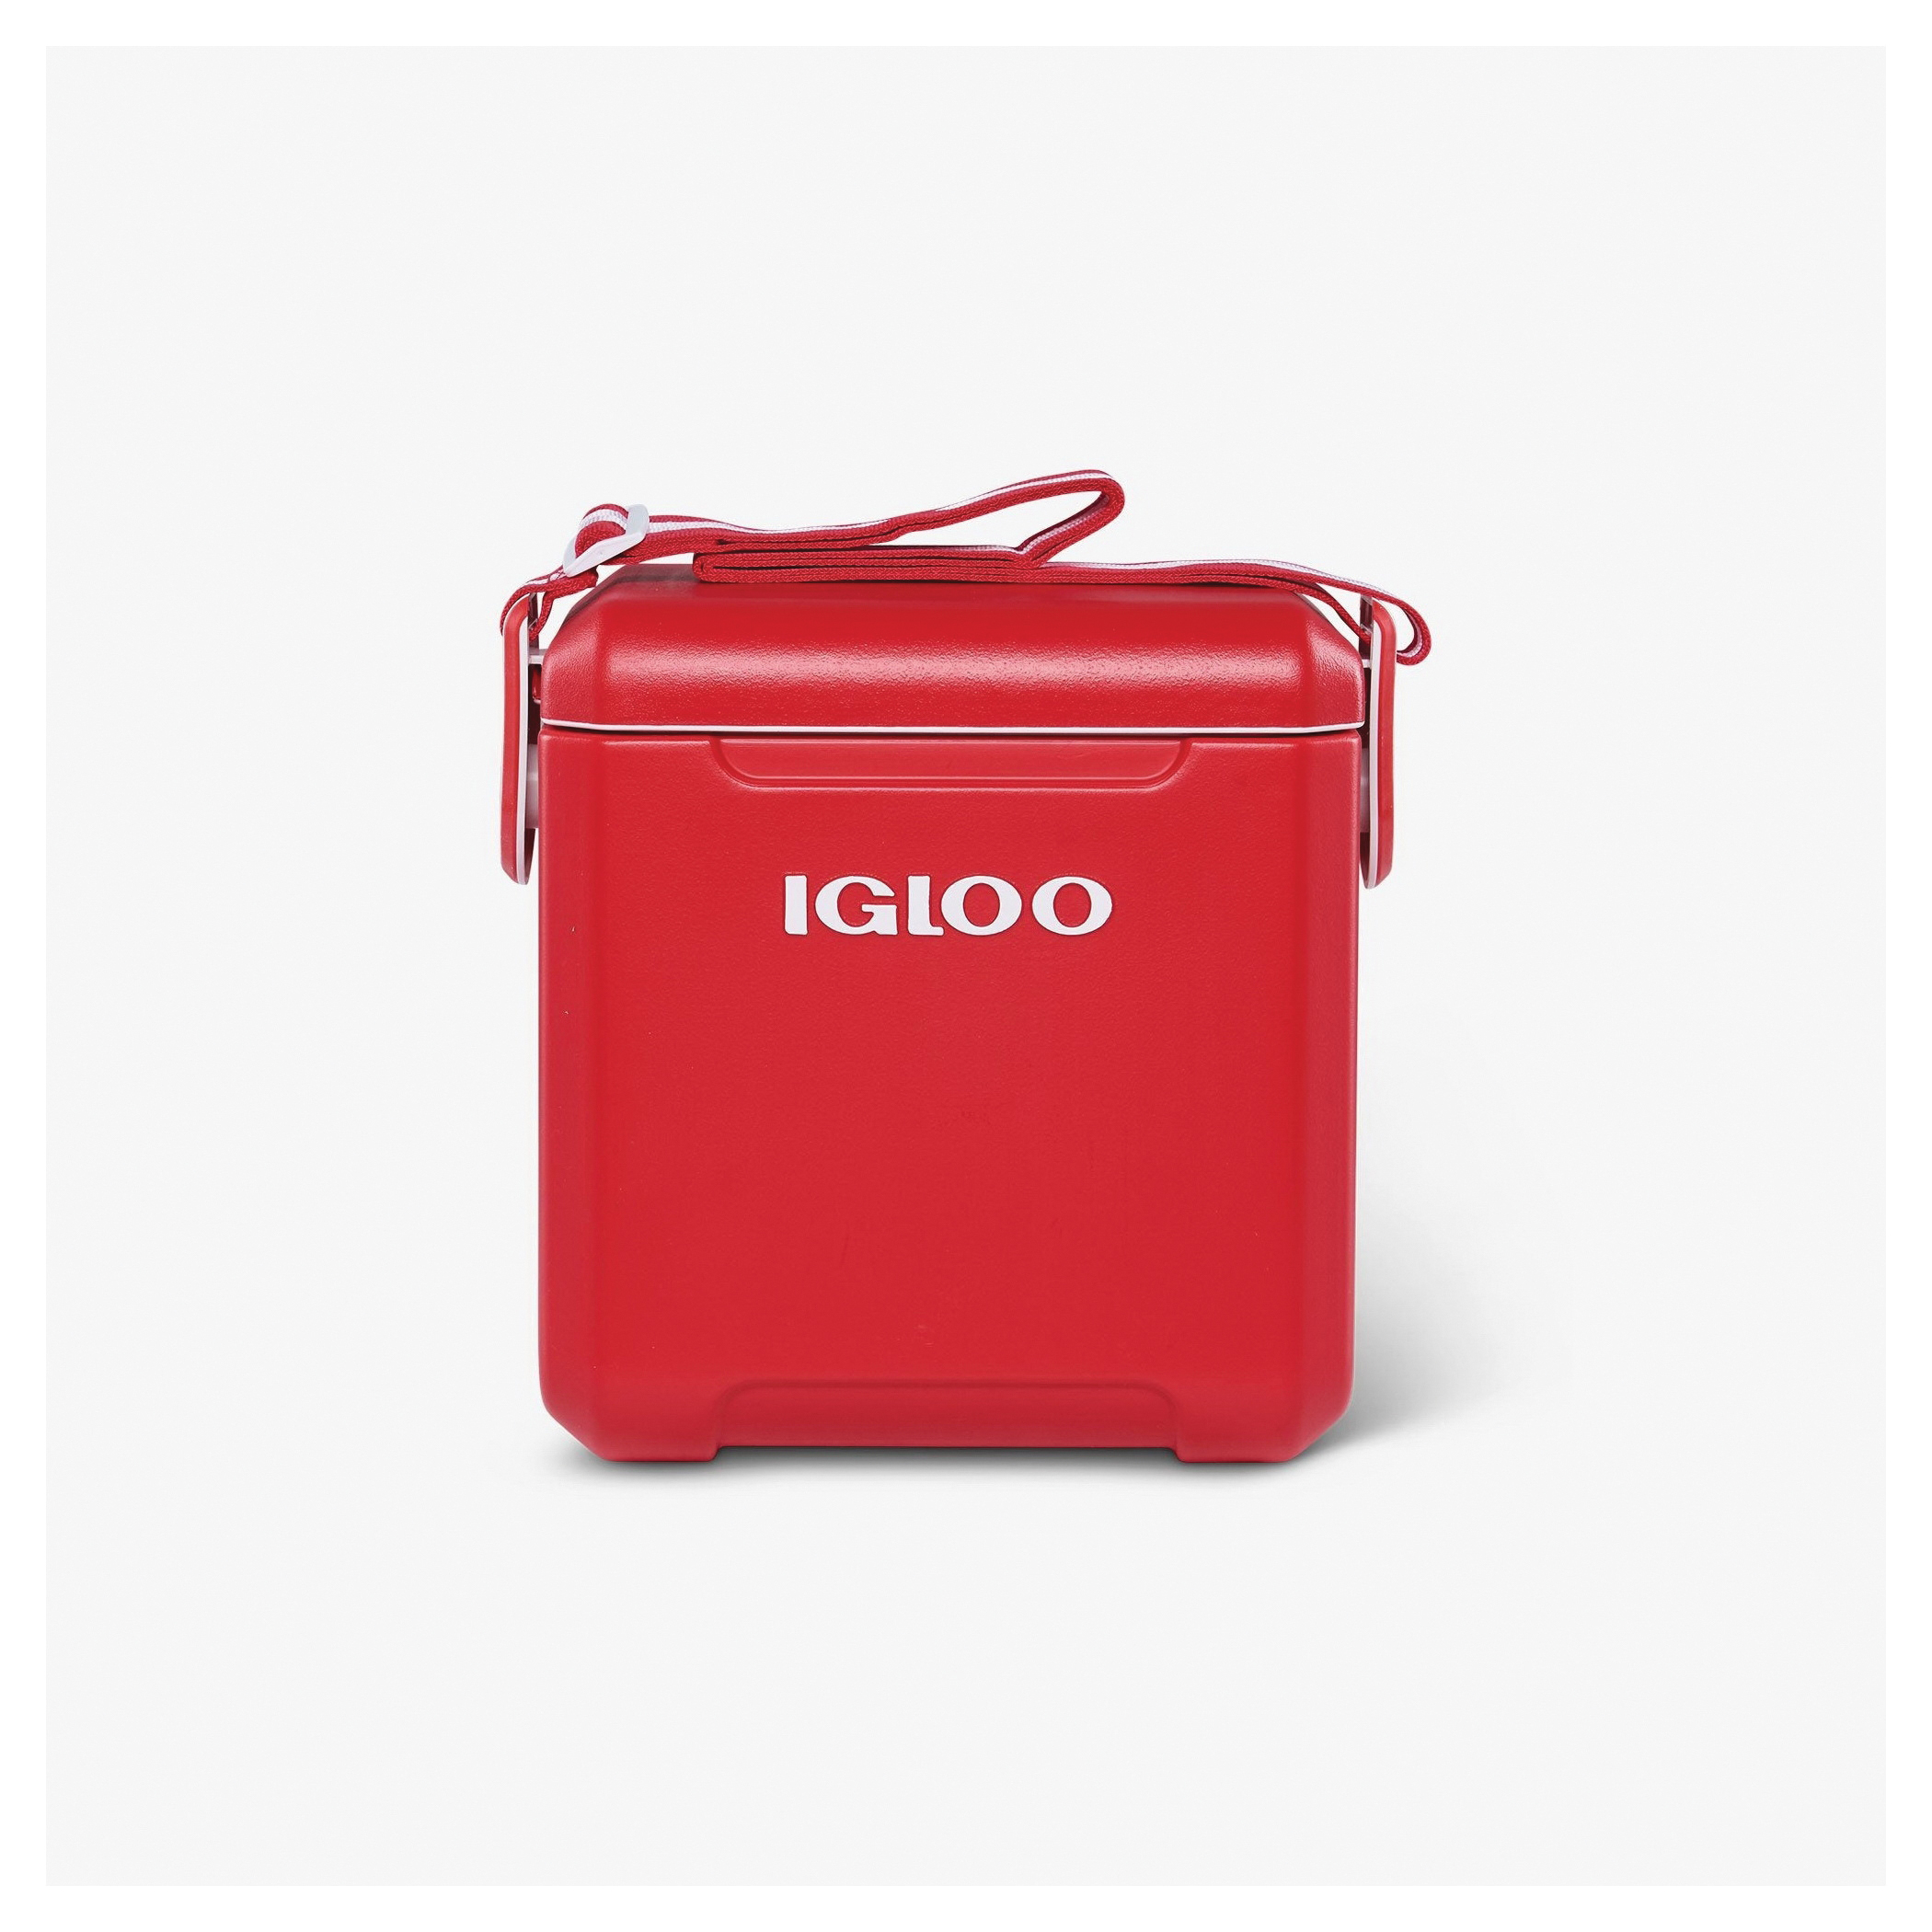 IGLOO '00032657 Tag Along Too Cooler, 14 Can Cooler, Plastic, Racer Red, 2 days Ice Retention